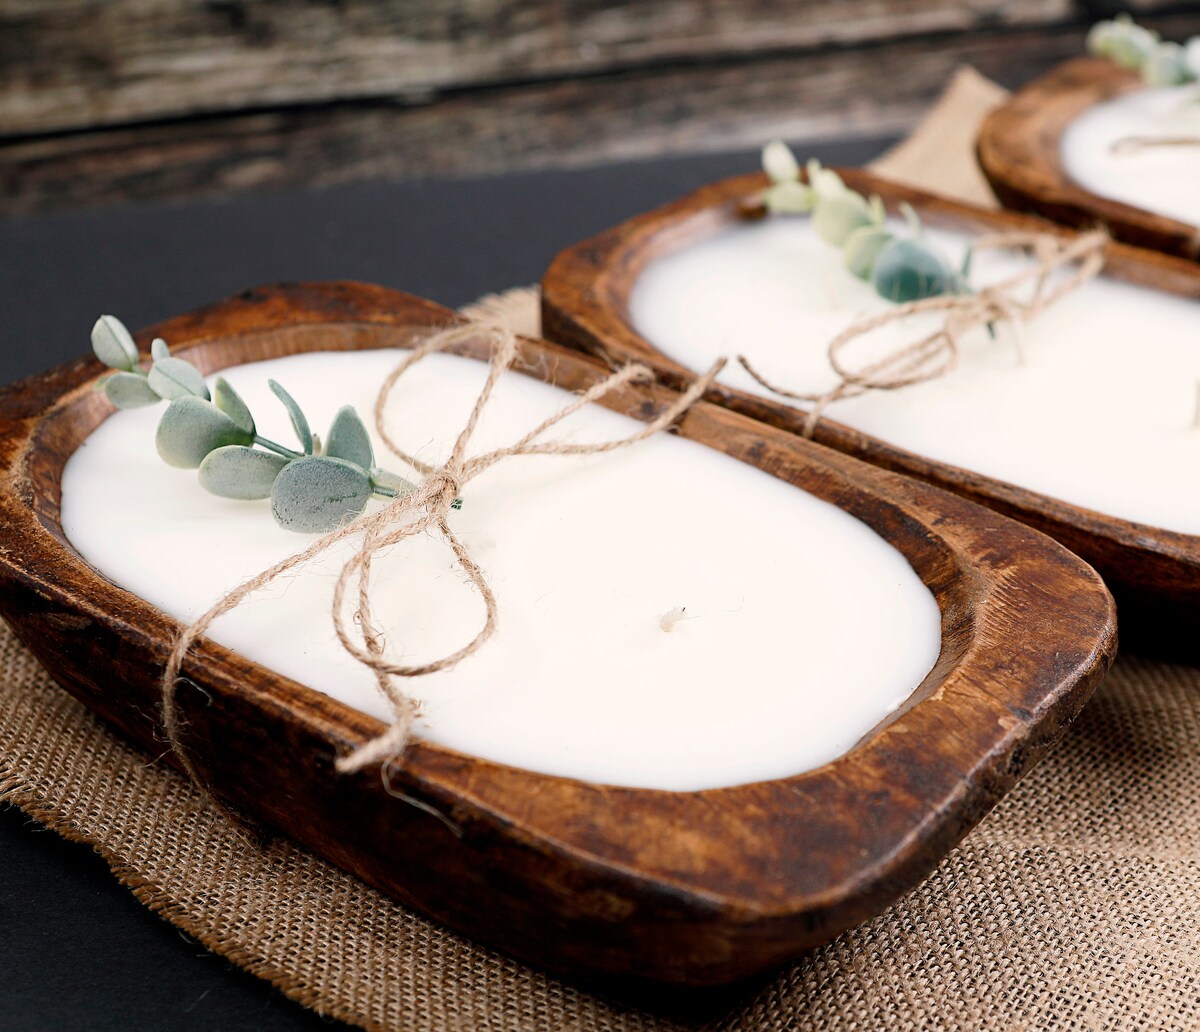 How To: Make Wooden Dough Bowl Candles! 